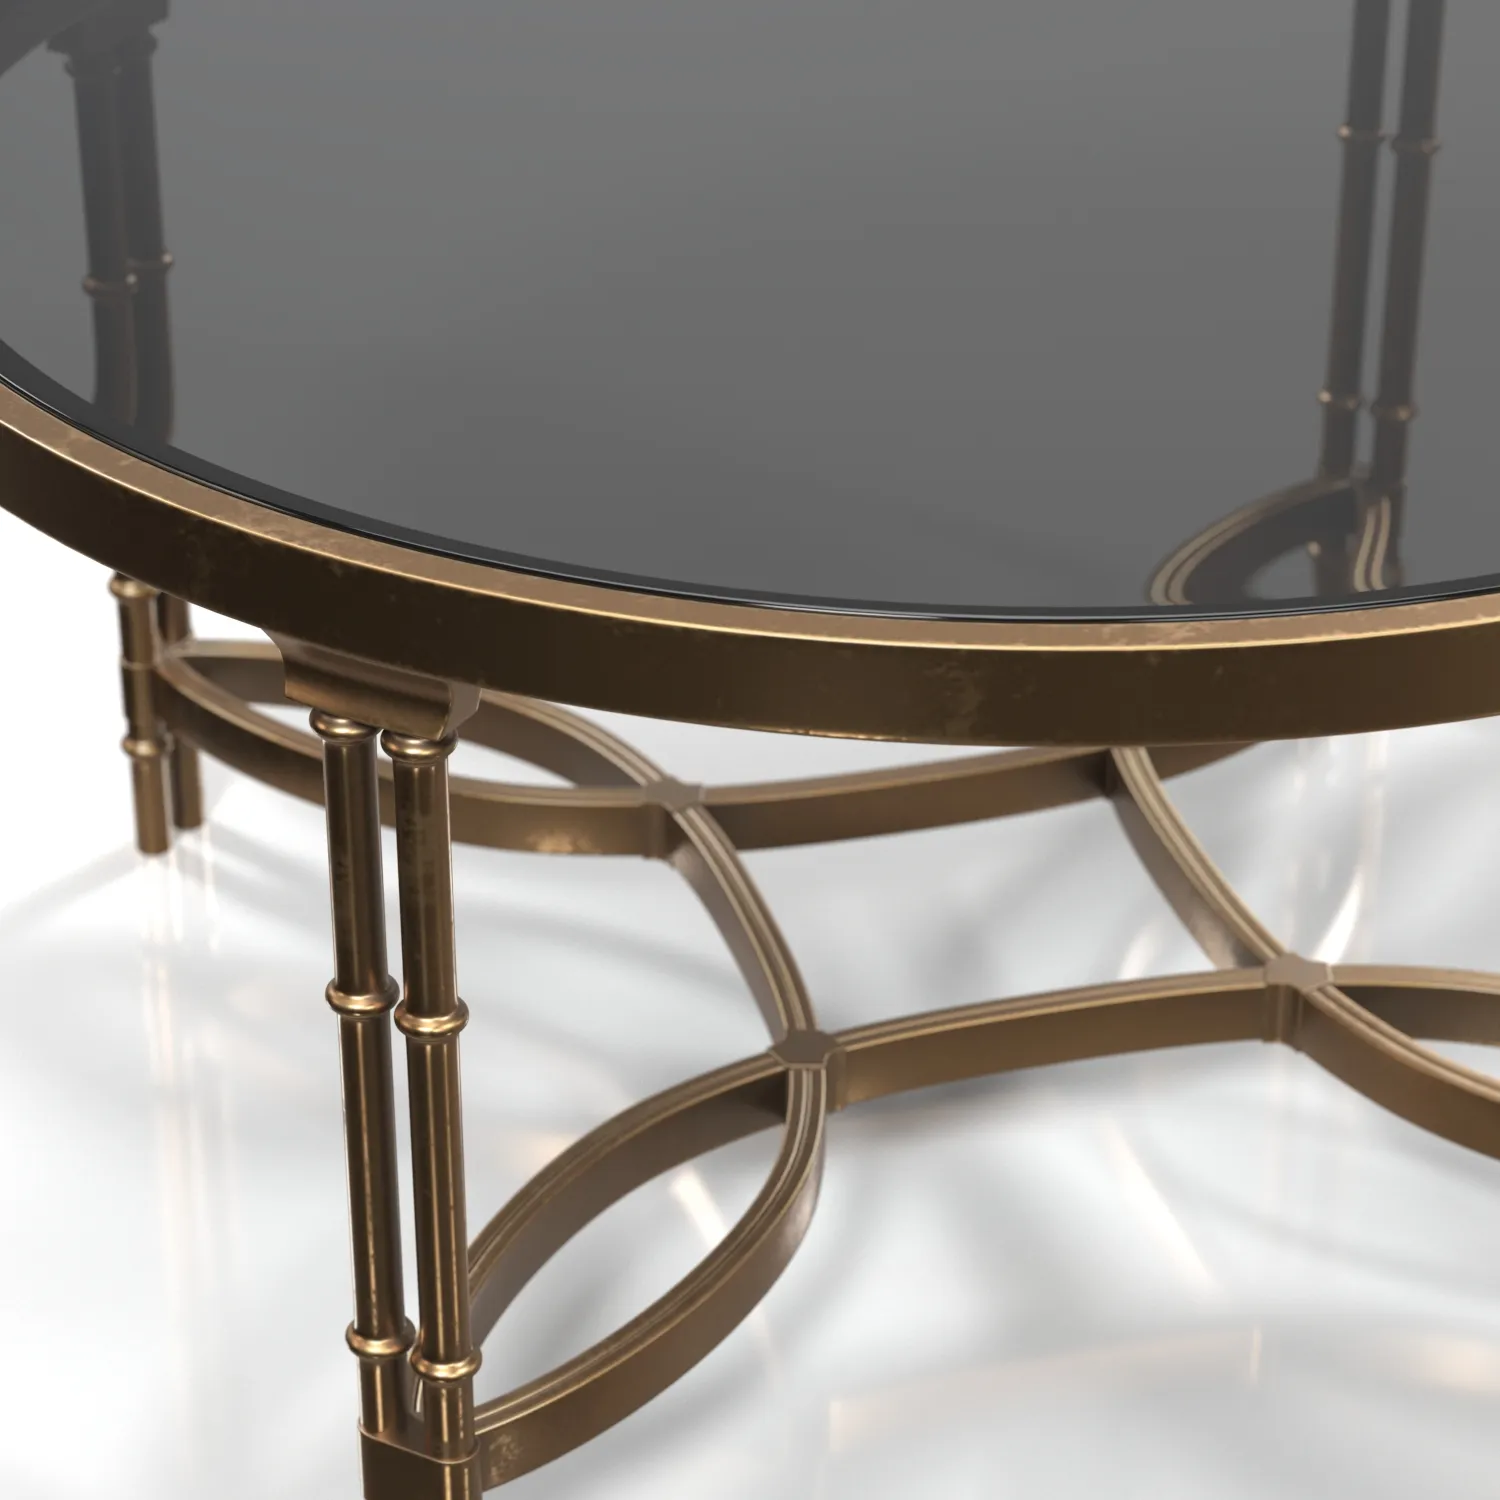 Handmade Decorative Rounded Coffee Table Gold Finish And Top Glass PBR 3D Model_05